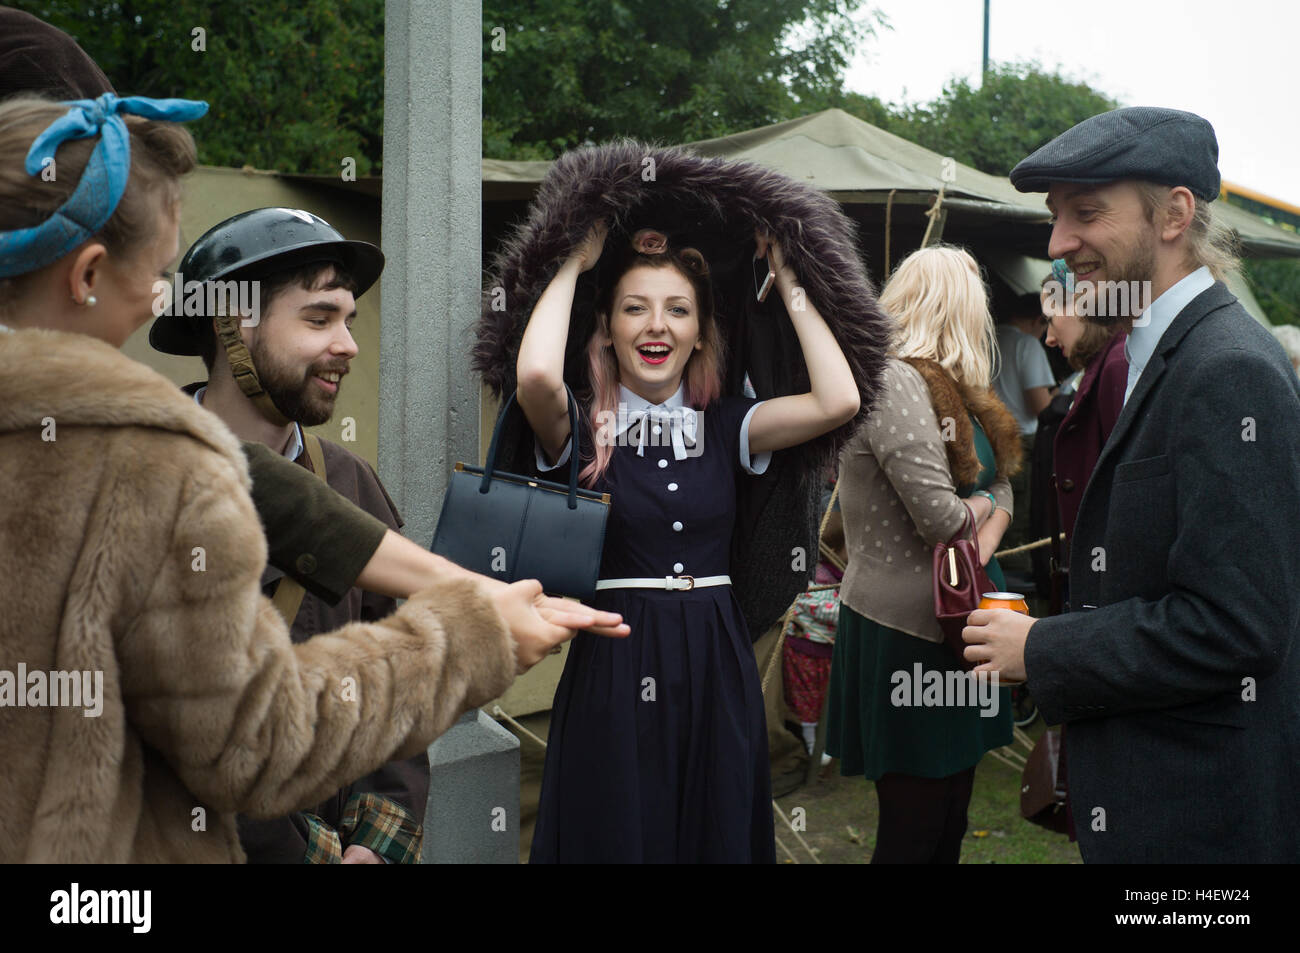 Forties weekend festival at Sheringham on the North Norfolk coast, England. Stock Photo